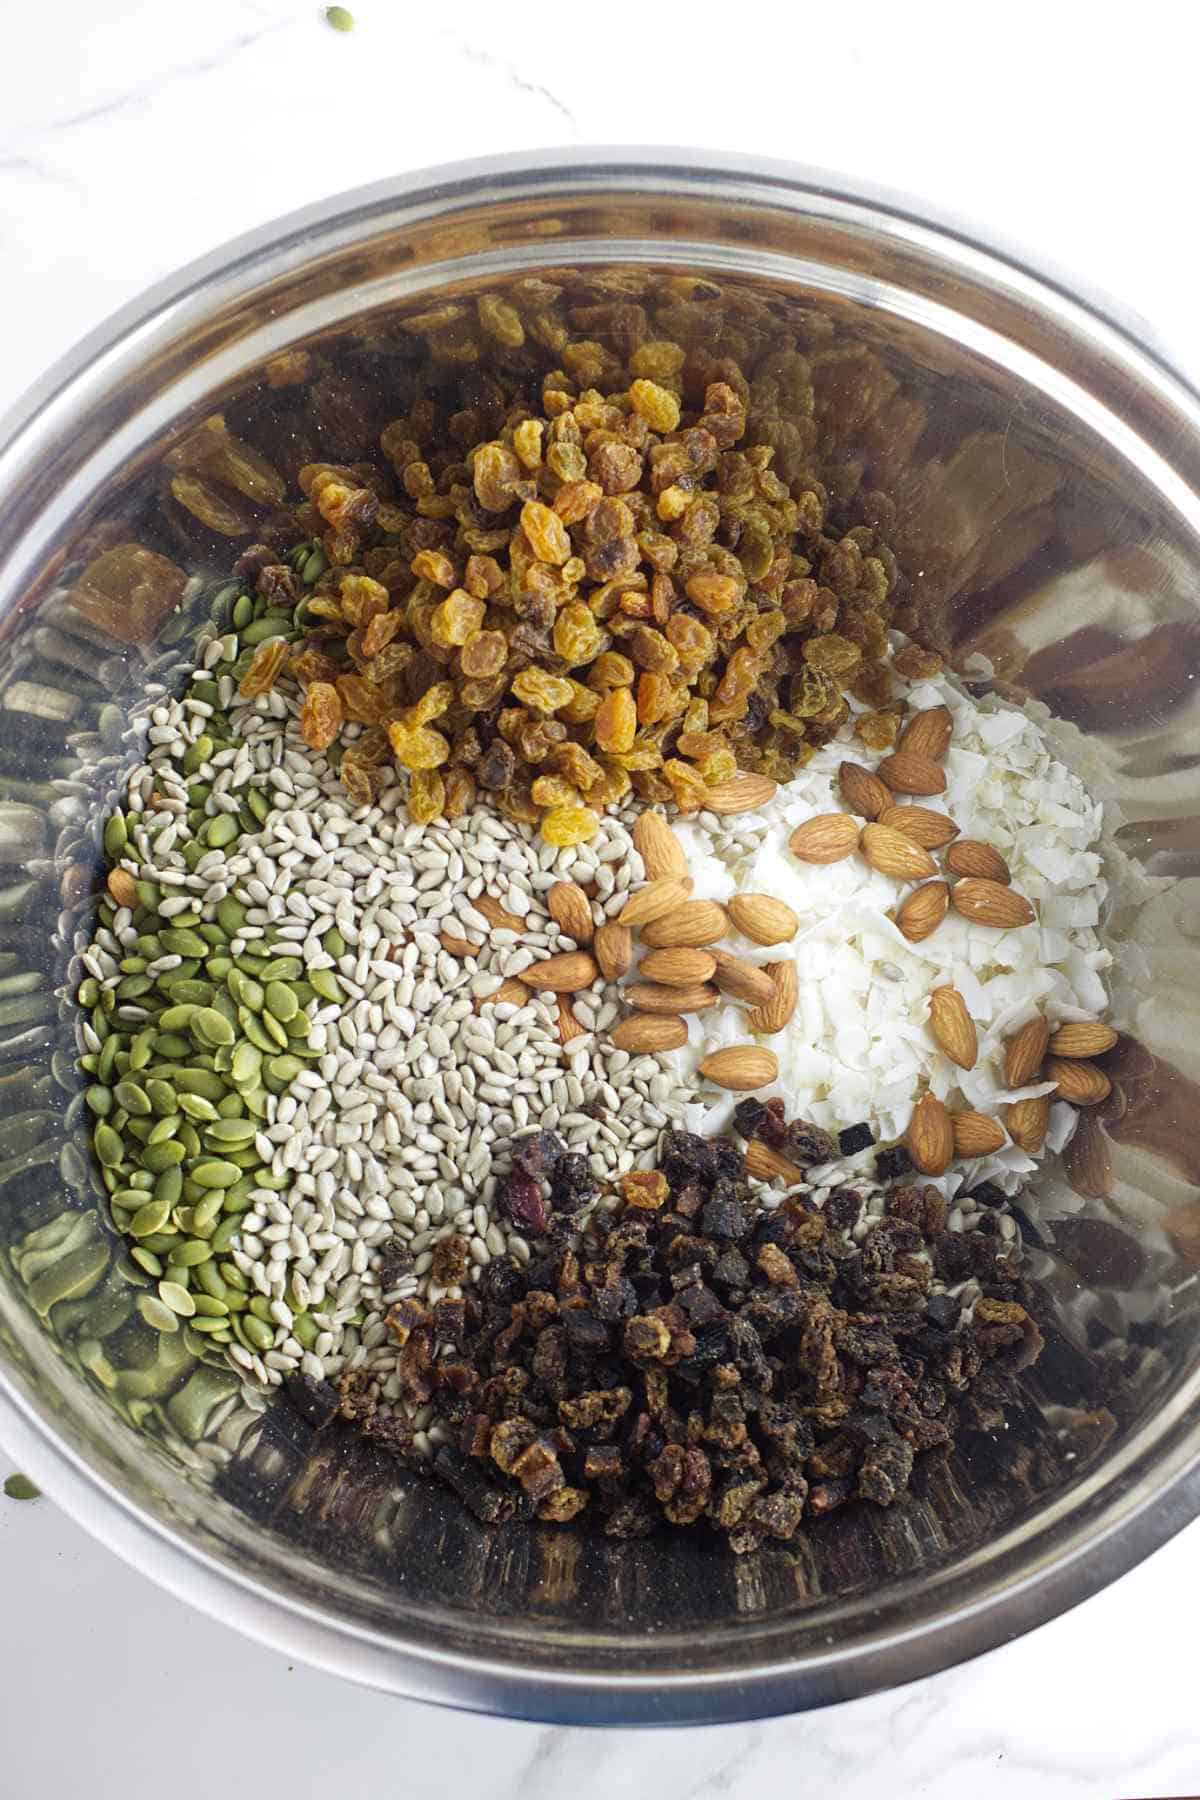 raisins, seeds, and nuts in a large bowl.